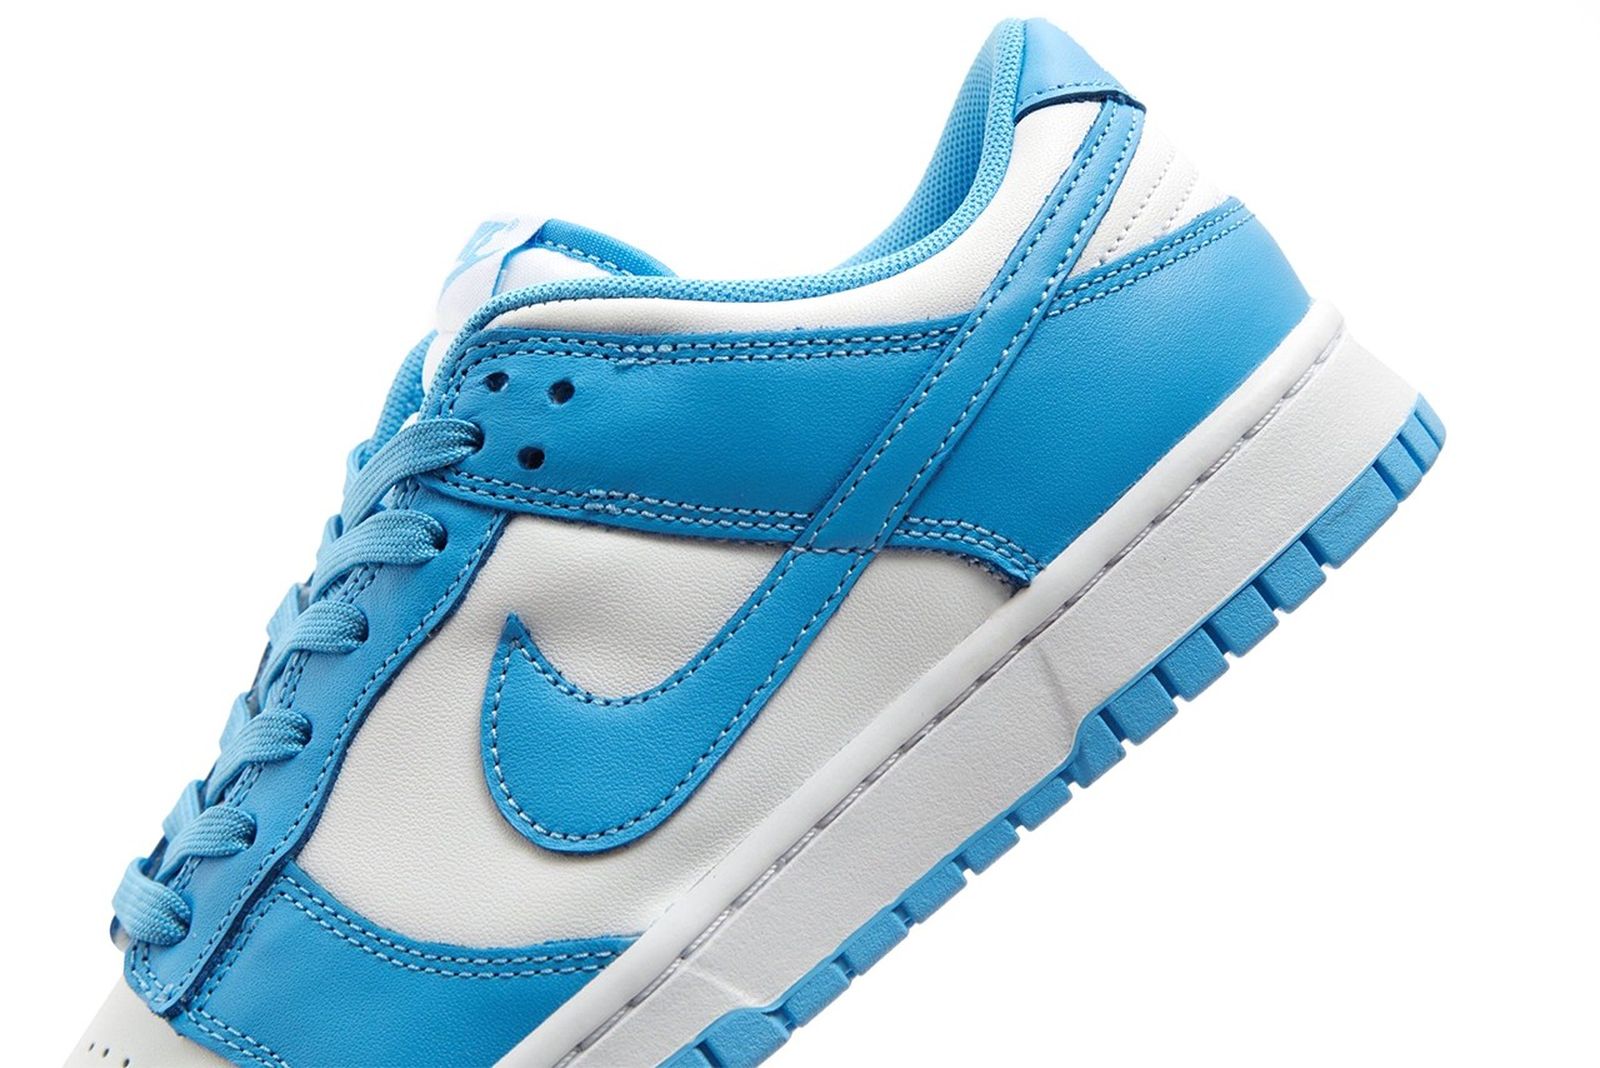 Nike Dunk unc blue dunks Low "University Blue": Official Images & Rumored Info